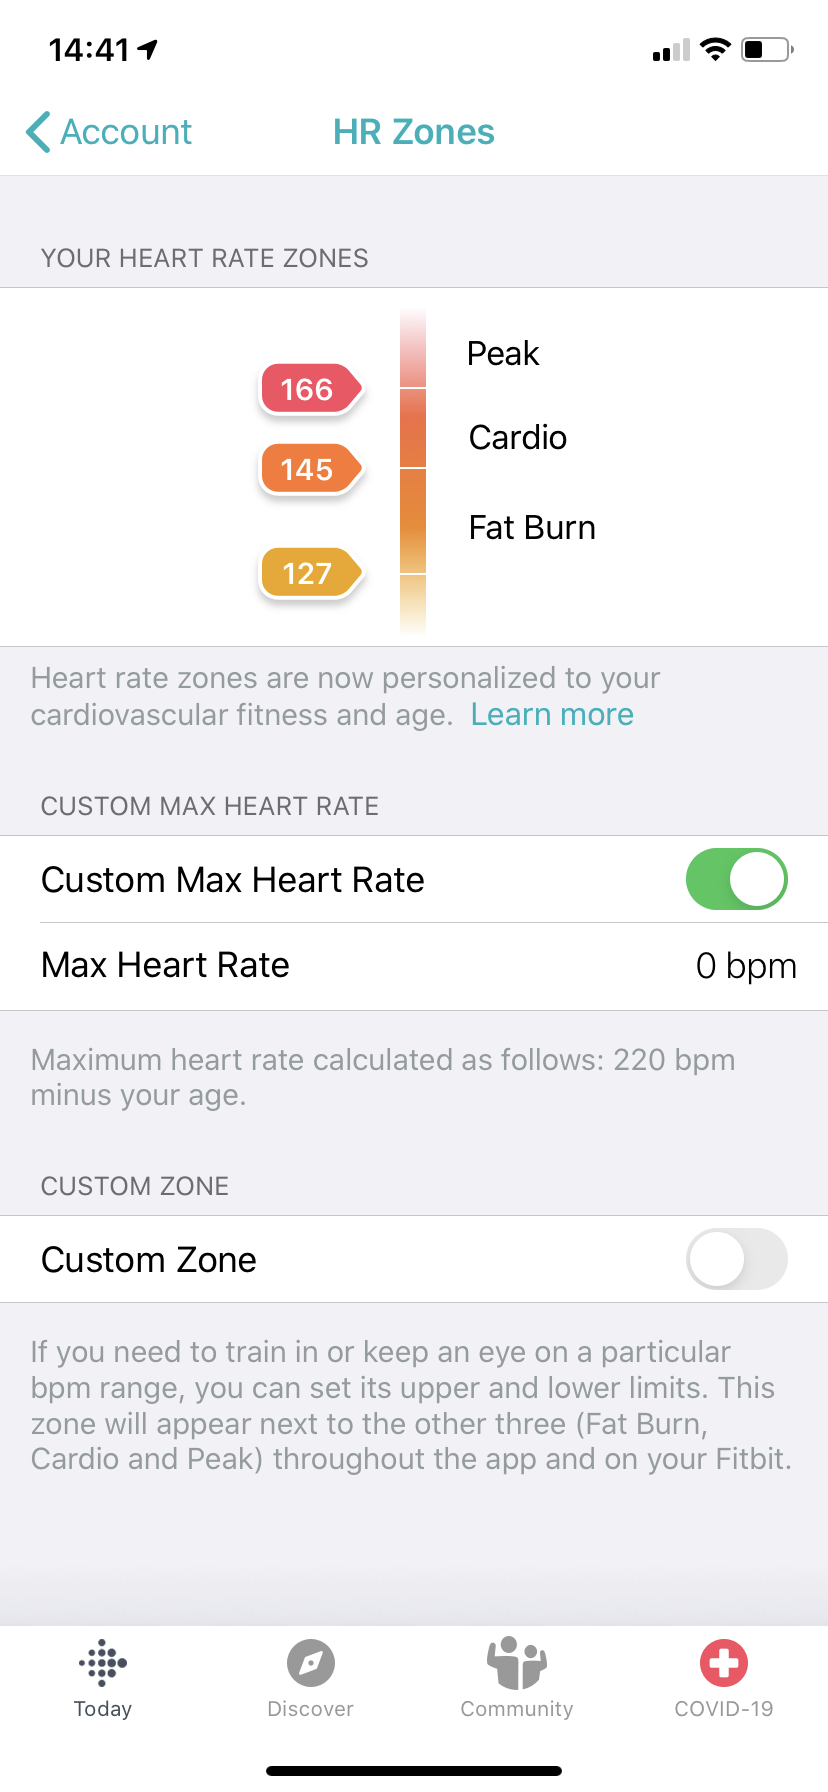 Can't customize my heart rate zones 